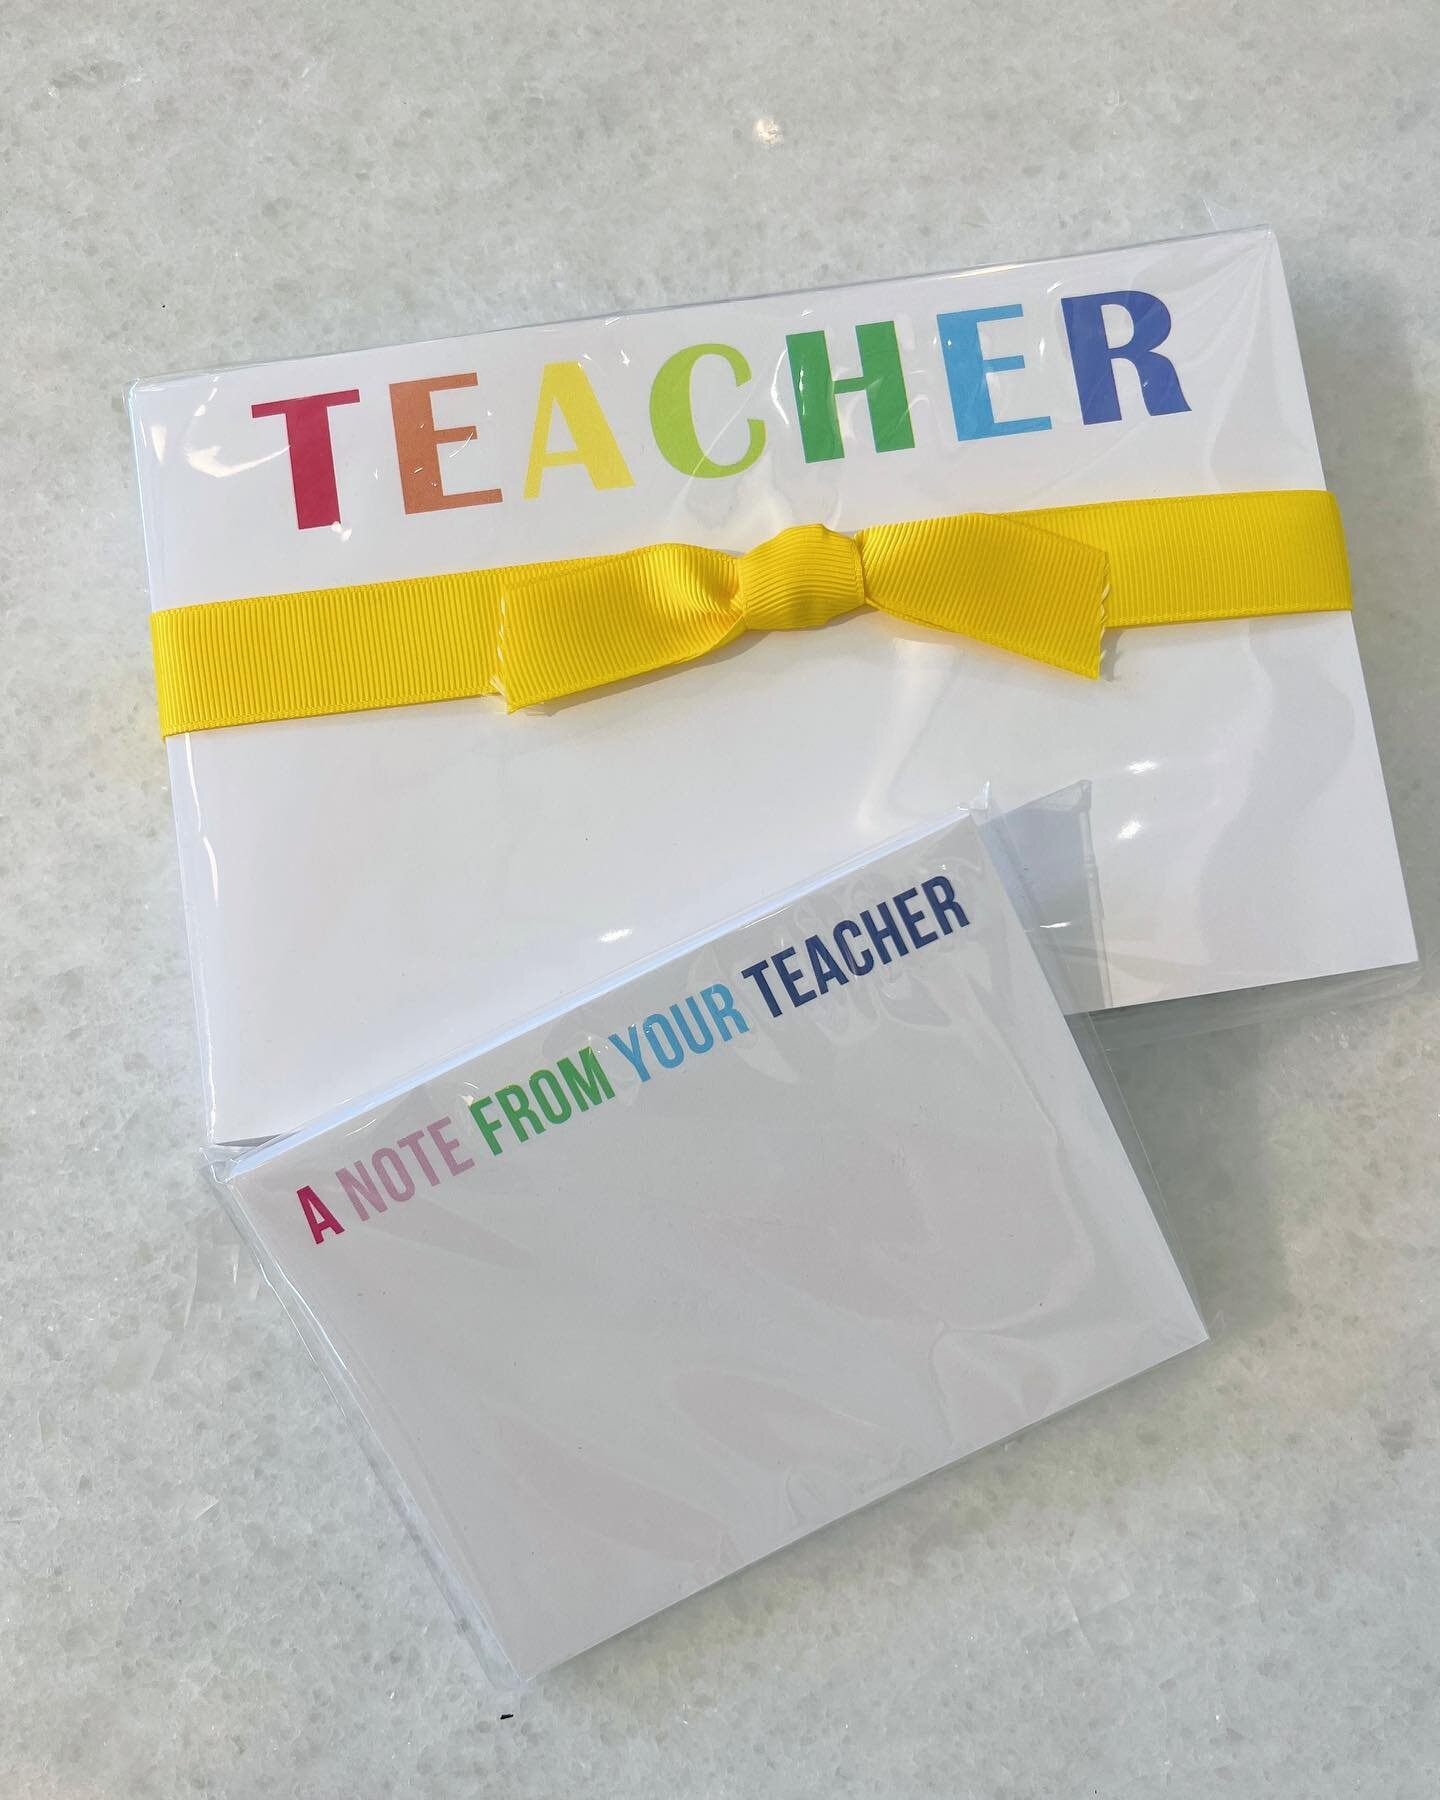 We 💛 teachers! Grab your end of the school year gifts with us while they last! 🍎📝

Teacher Big &amp; Bold: $28.98
A Note From Your Teacher: $6.21
Teacher Fuel Beaded Wristlet: $28.00 
Teach Love Inspire Beaded Pouch: $18.00 

#shoplocal #womenowne